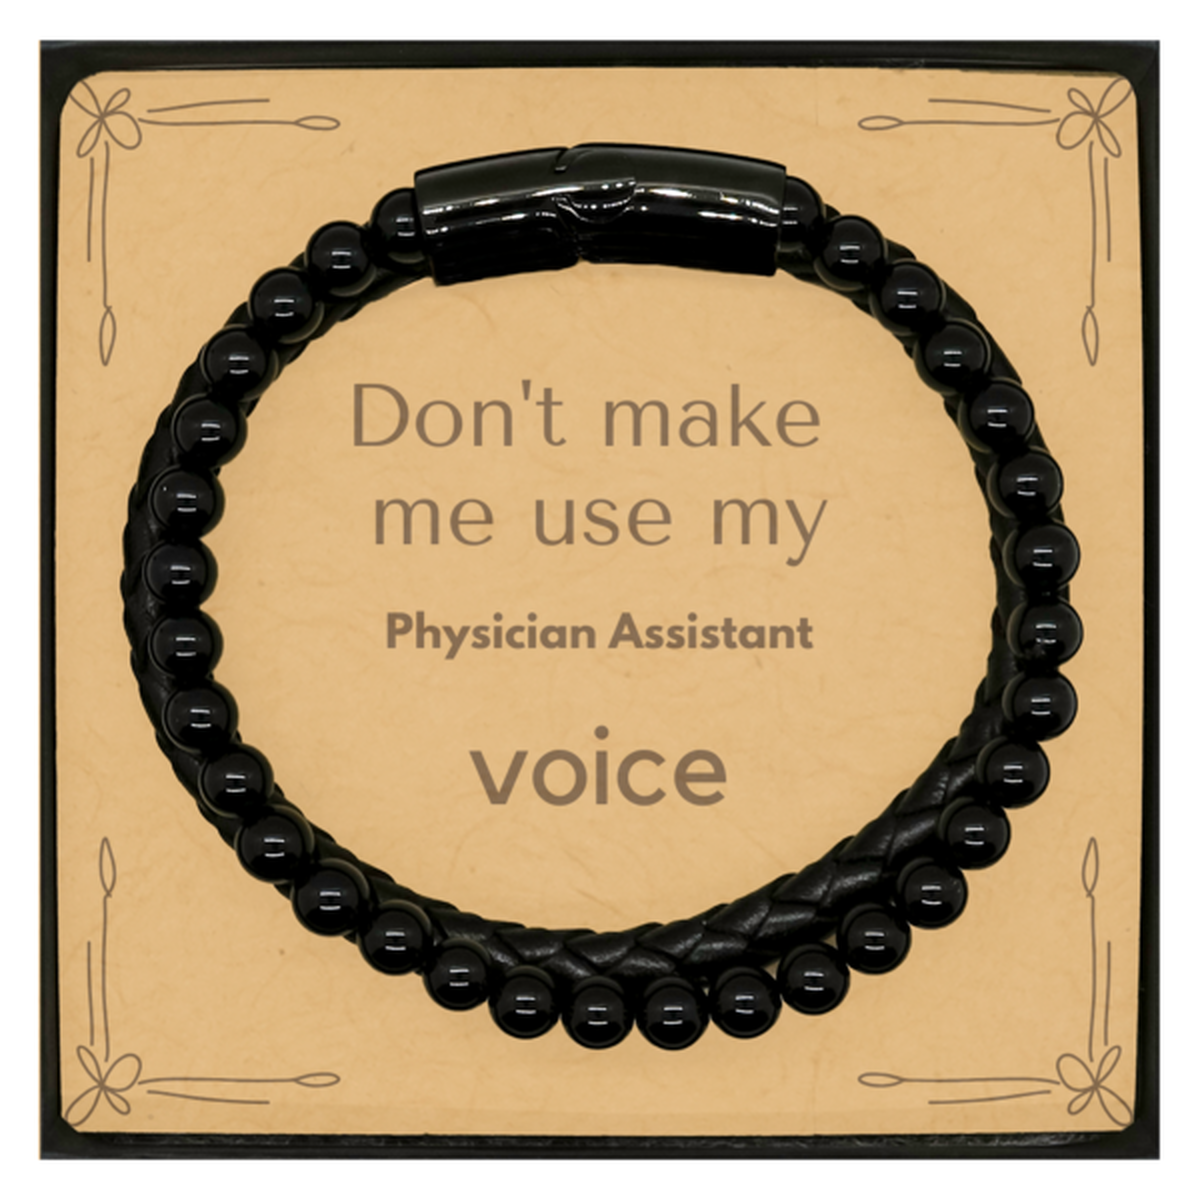 Don't make me use my Physician Assistant voice, Sarcasm Physician Assistant Card Gifts, Christmas Physician Assistant Stone Leather Bracelets Birthday Unique Gifts For Physician Assistant Coworkers, Men, Women, Colleague, Friends